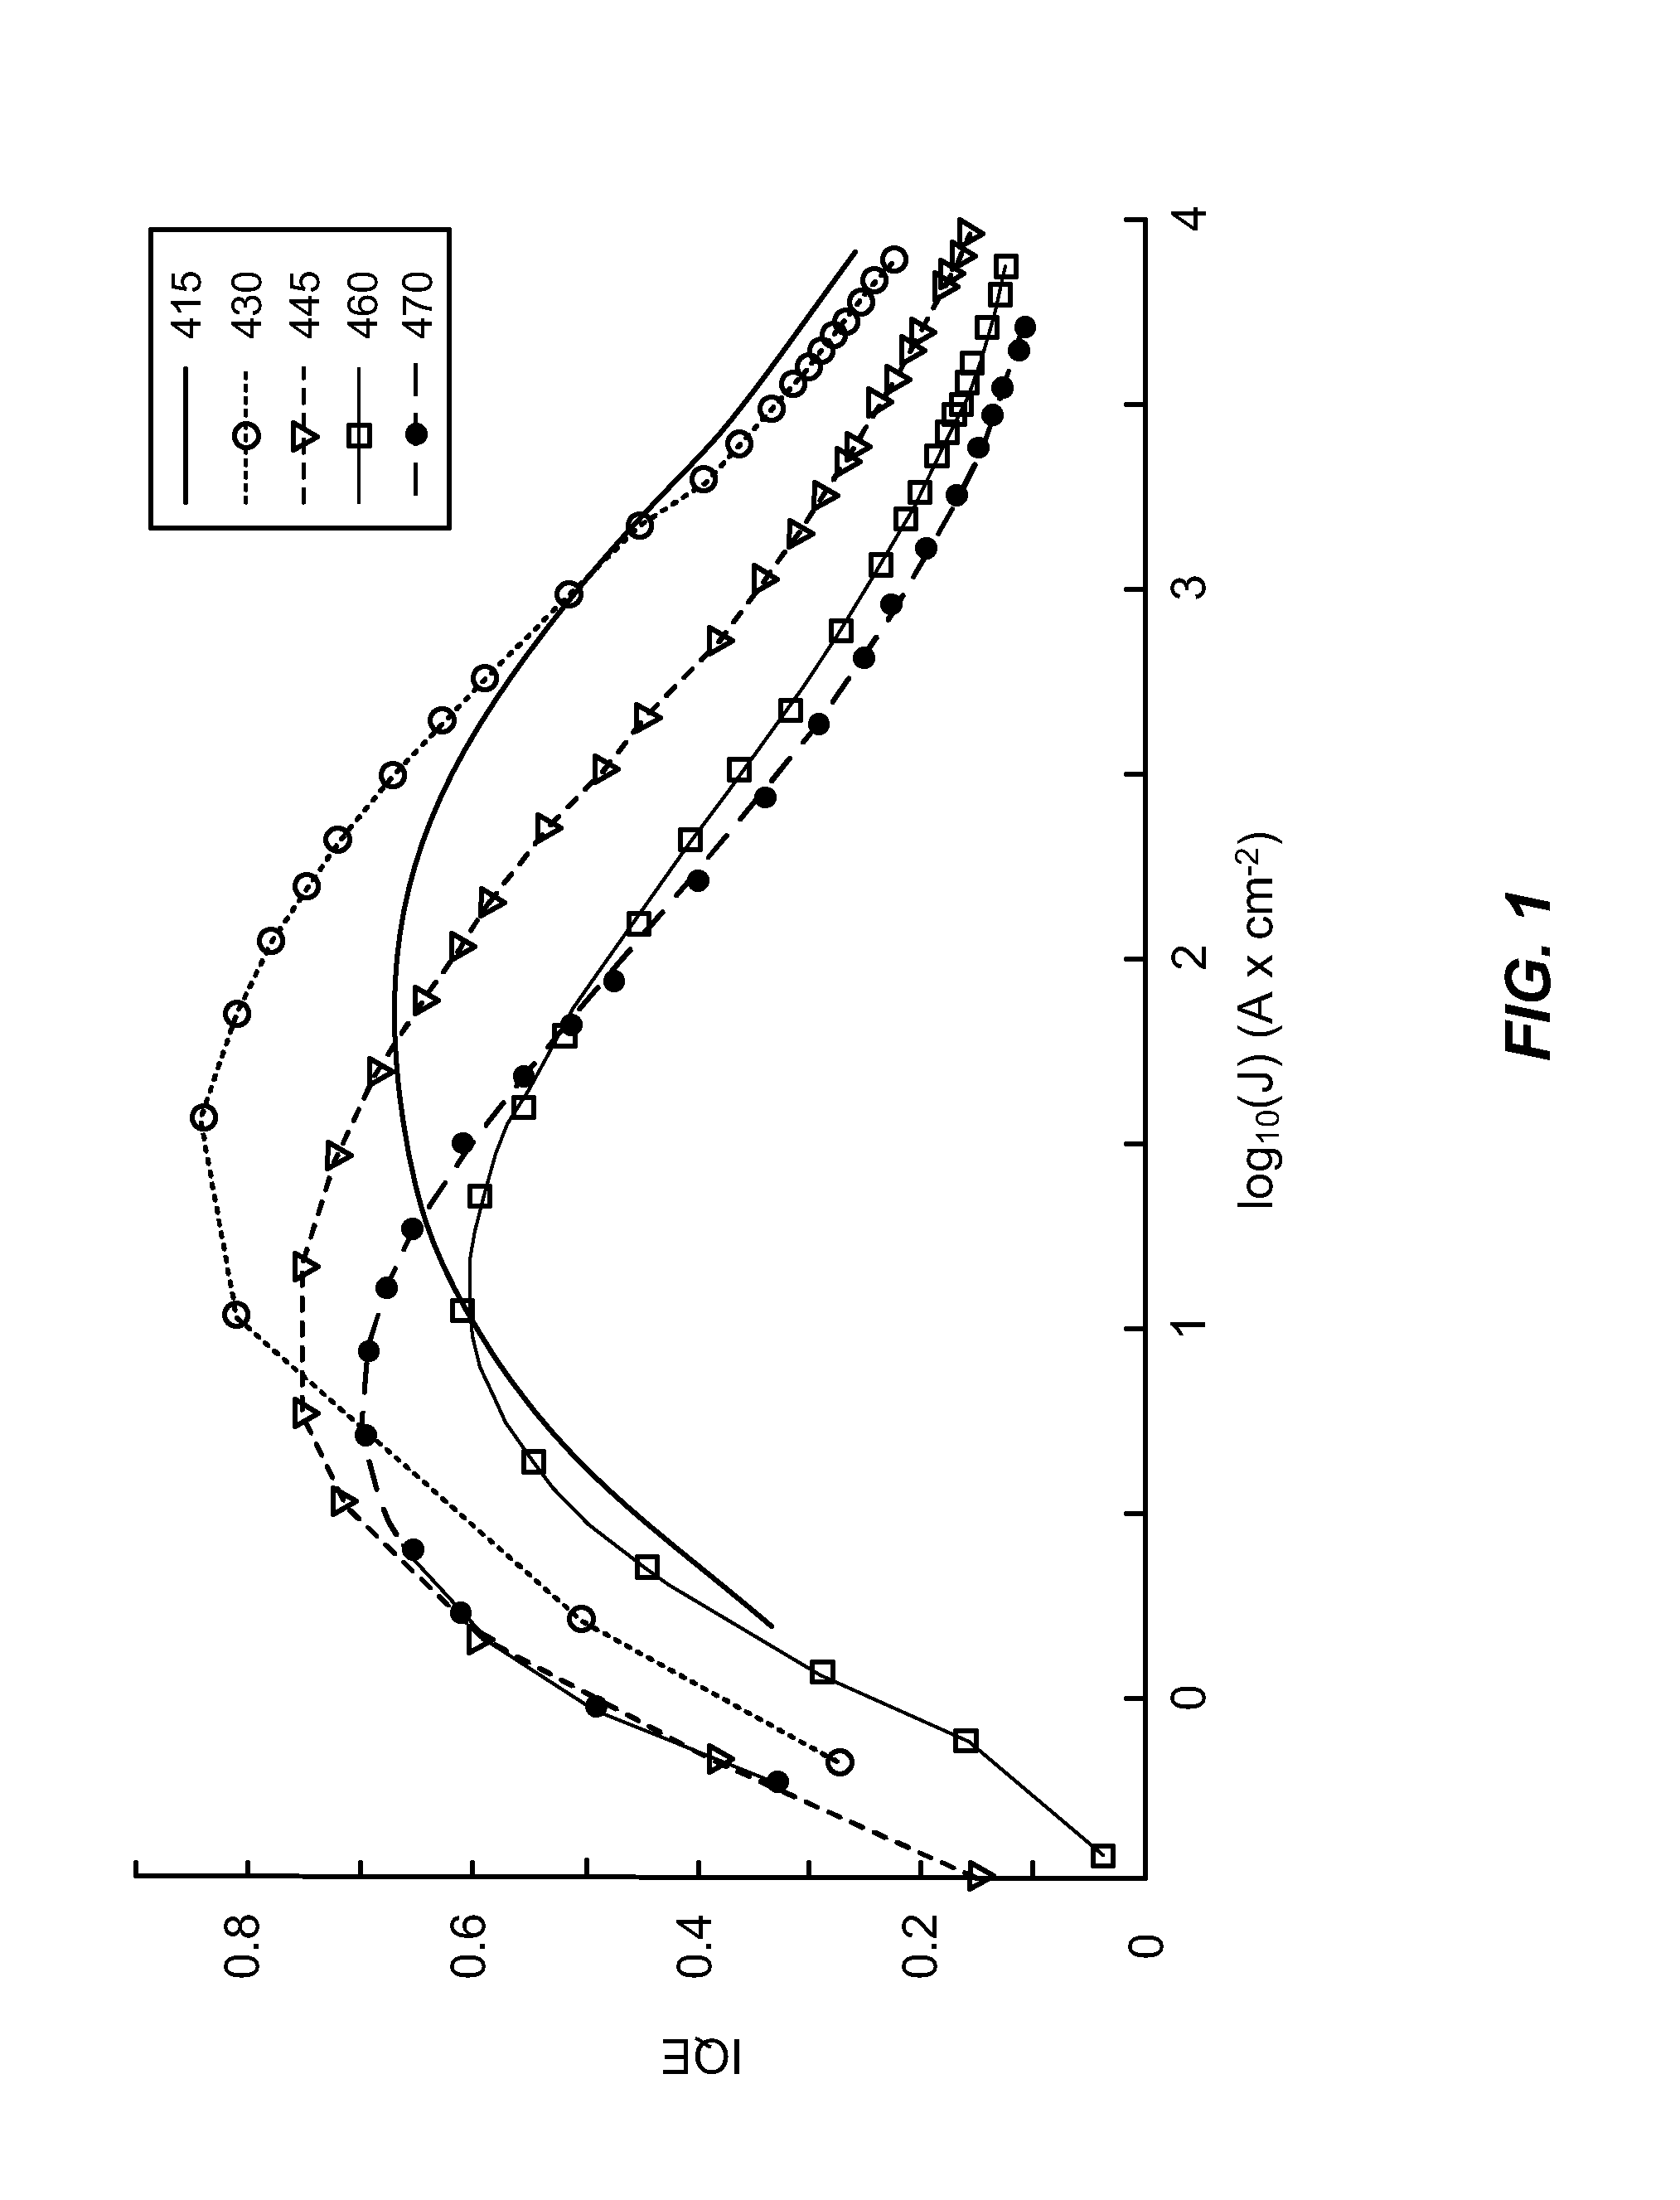 System and Method for Selected Pump LEDs with Multiple Phosphors